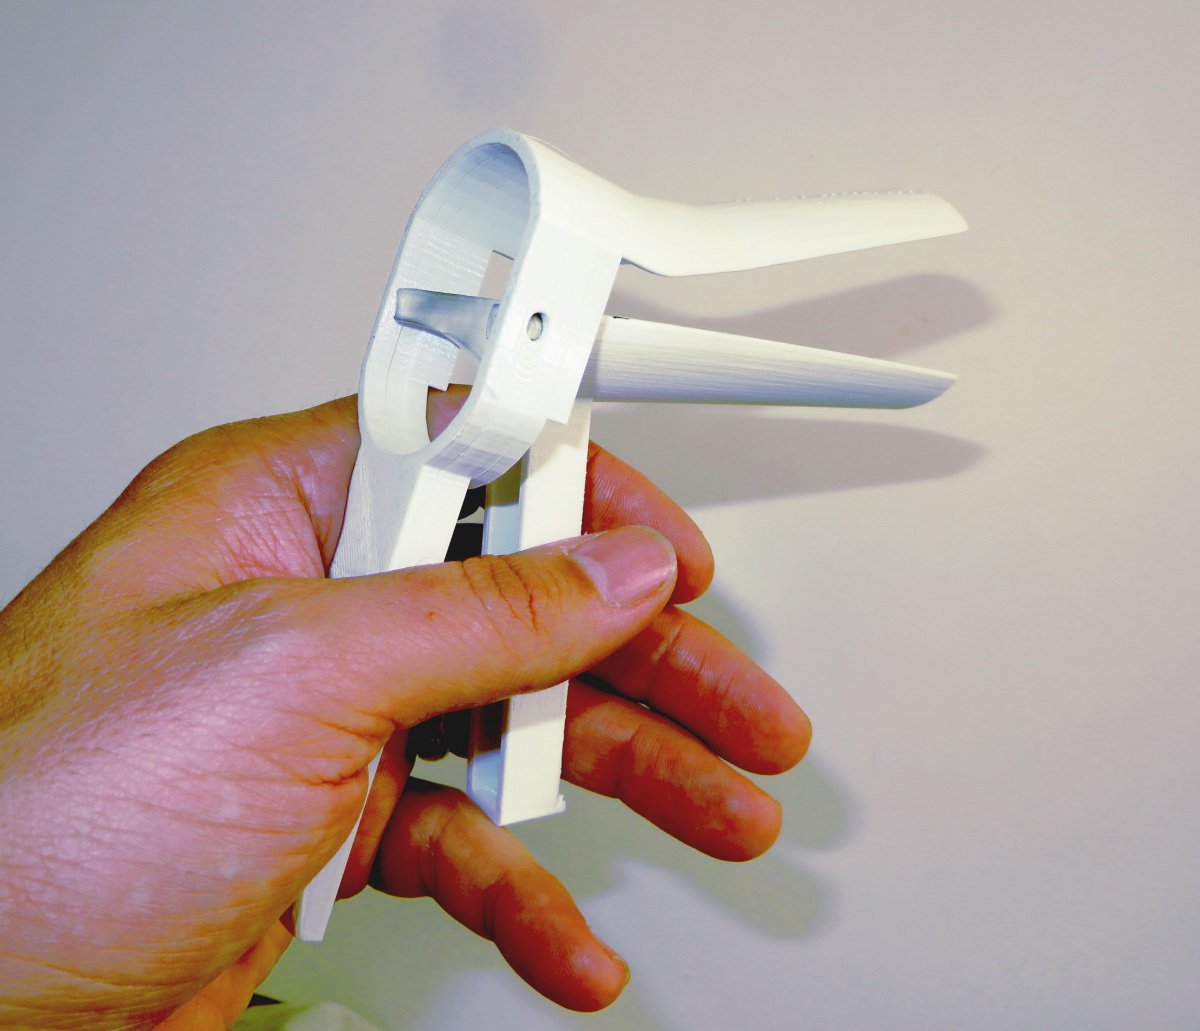 Photo of a hand holding a white device by the legs that opens and closes the contraption's mouth that looks like a pelican's beak.